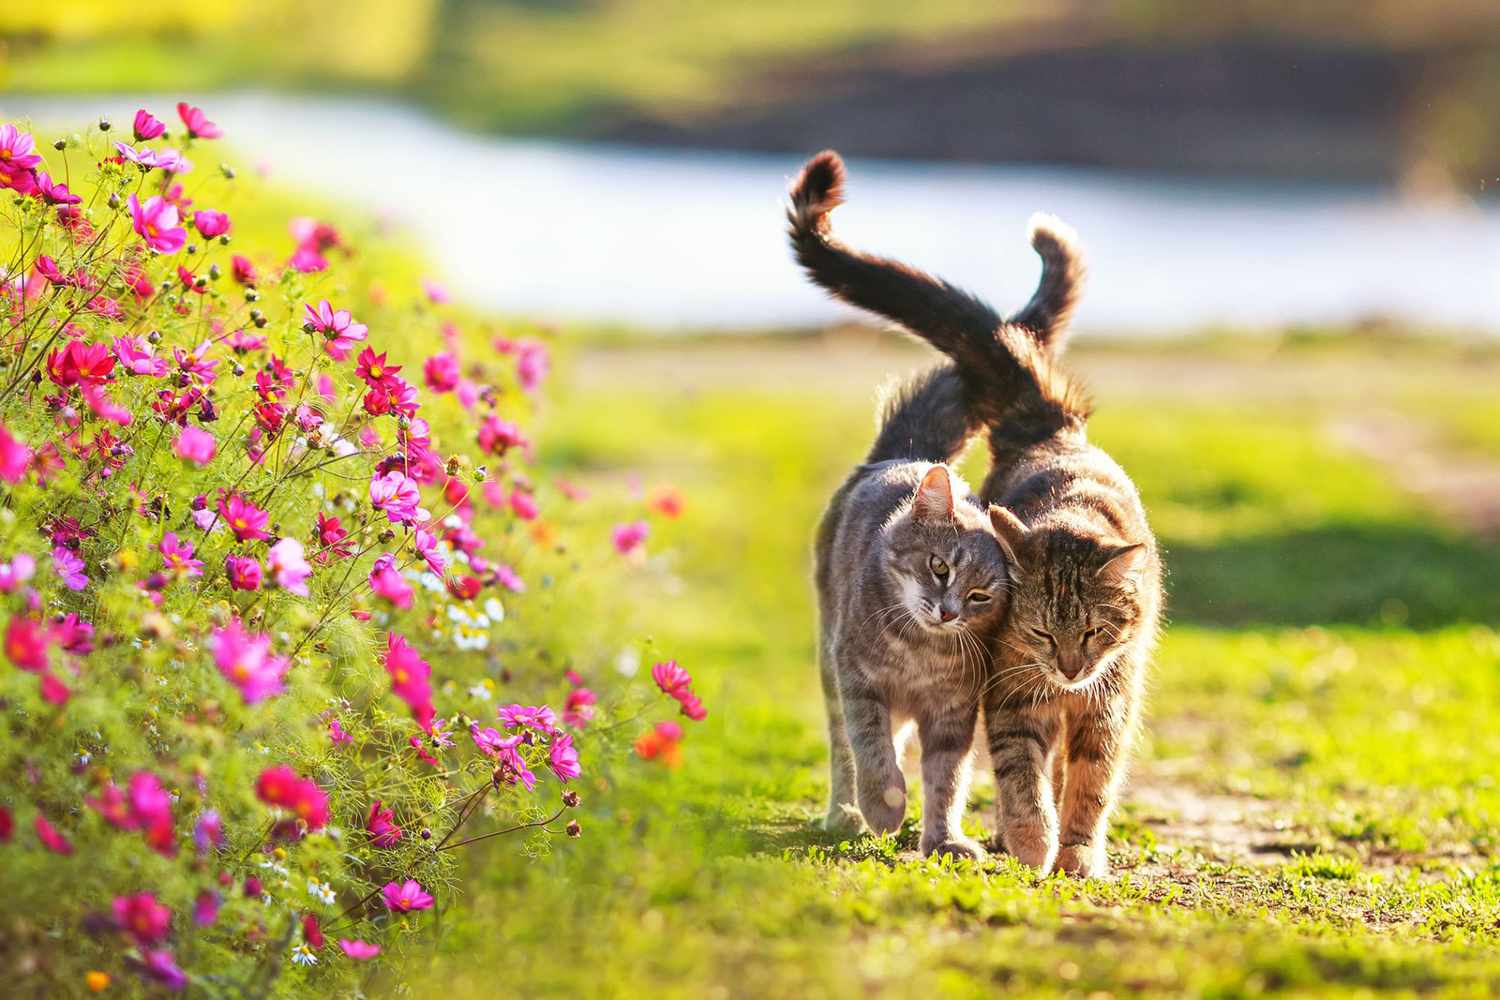 two cats walking together outside near spring flowers